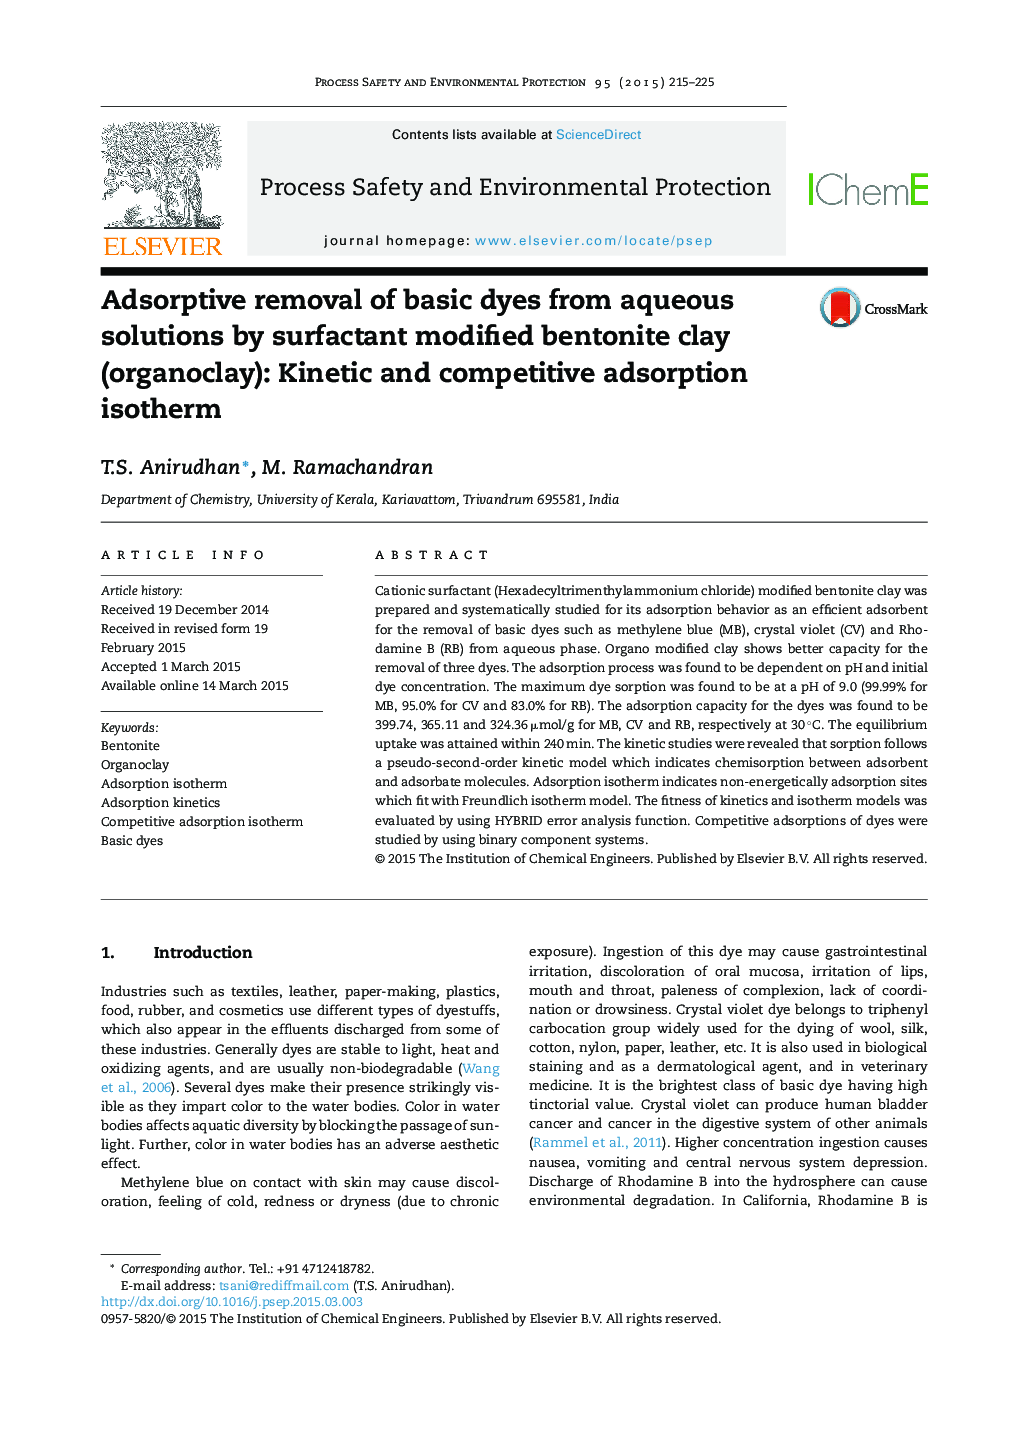 Adsorptive removal of basic dyes from aqueous solutions by surfactant modified bentonite clay (organoclay): Kinetic and competitive adsorption isotherm